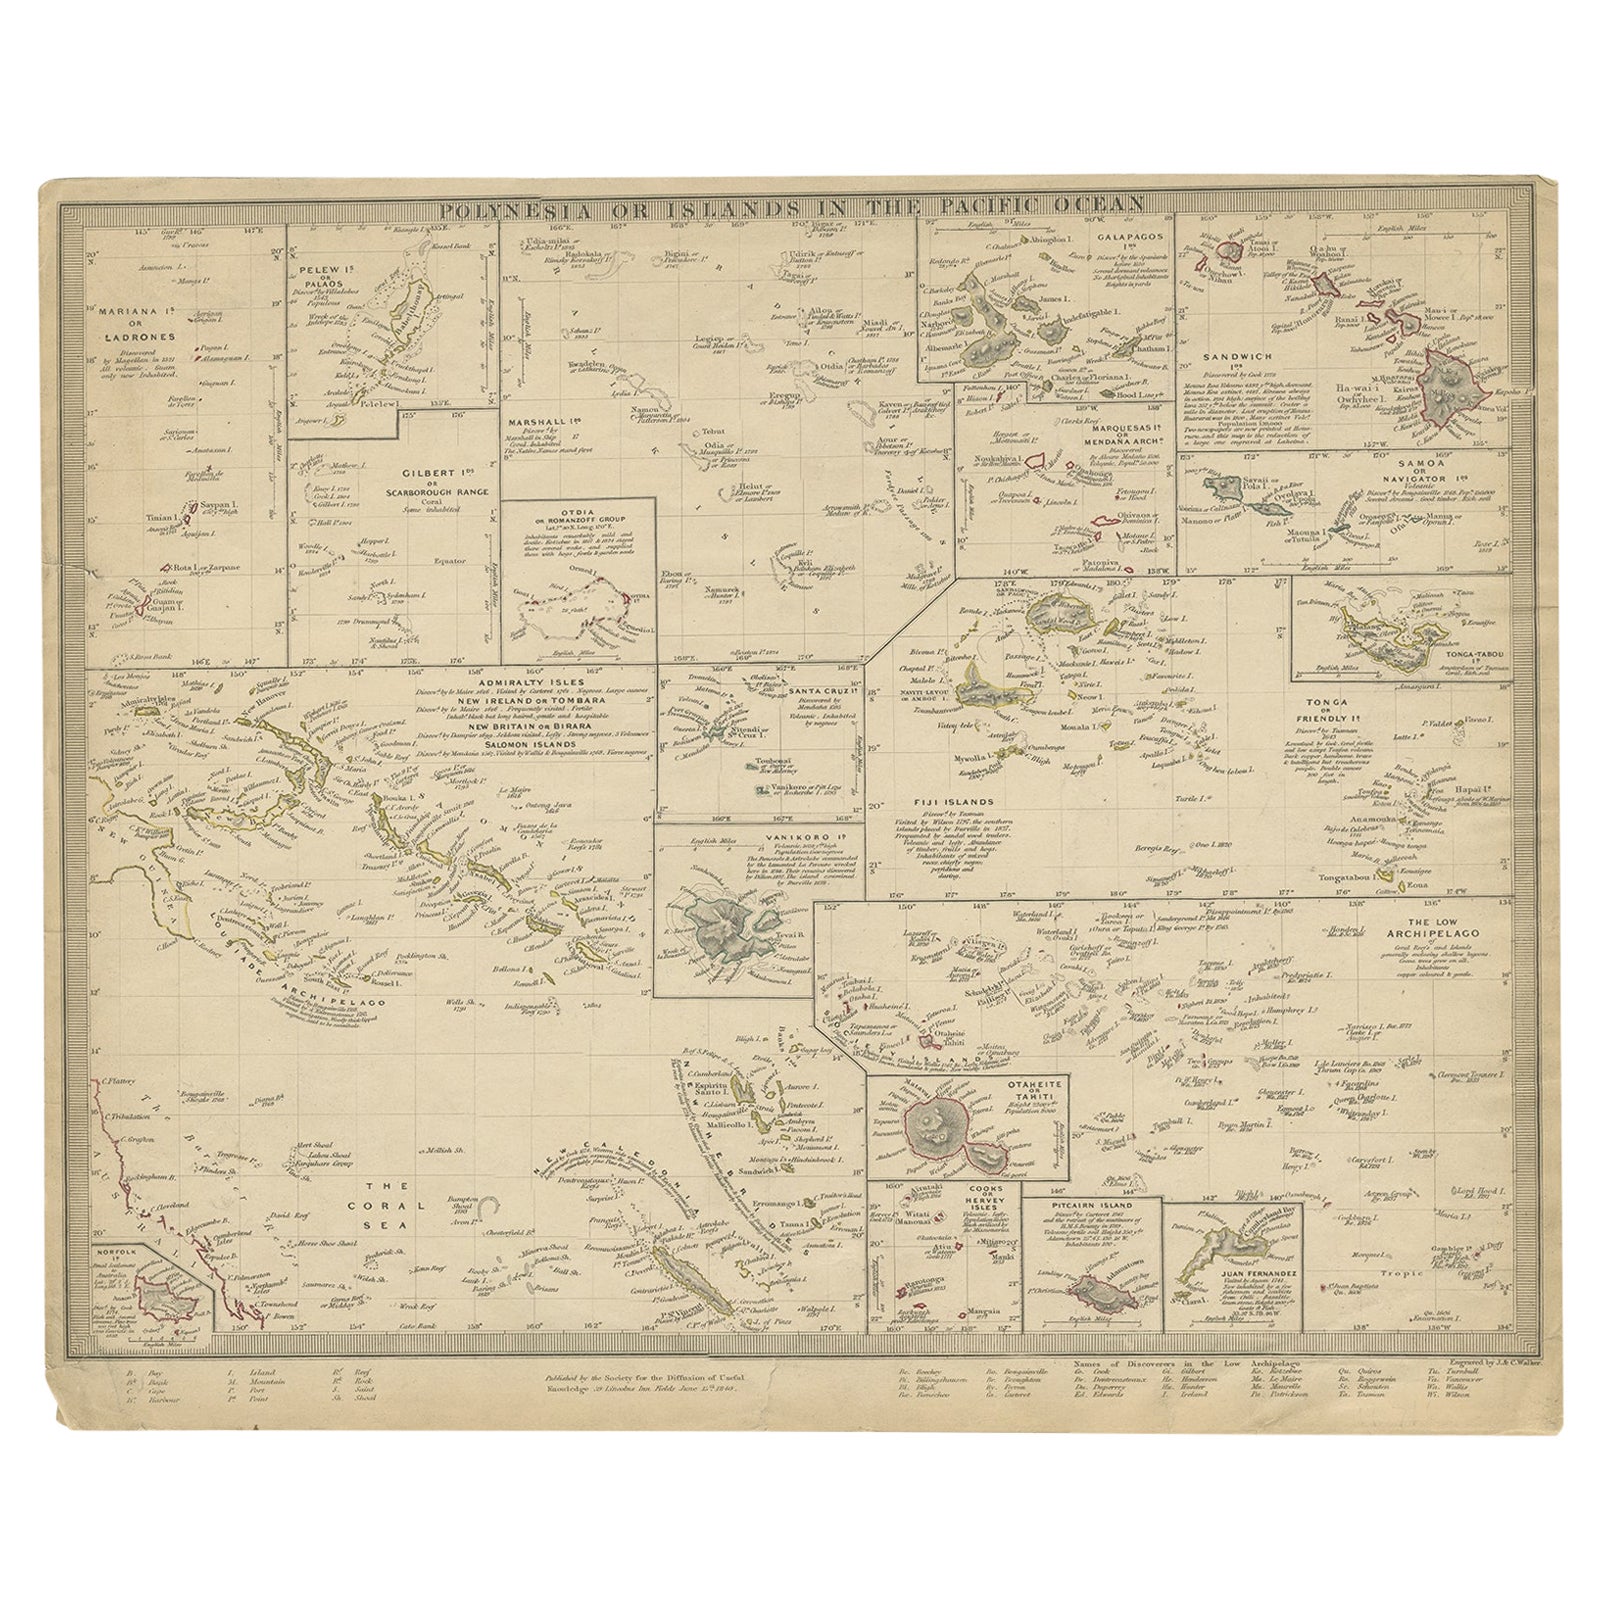 Antique Map of Polynesia by Walker, 1840